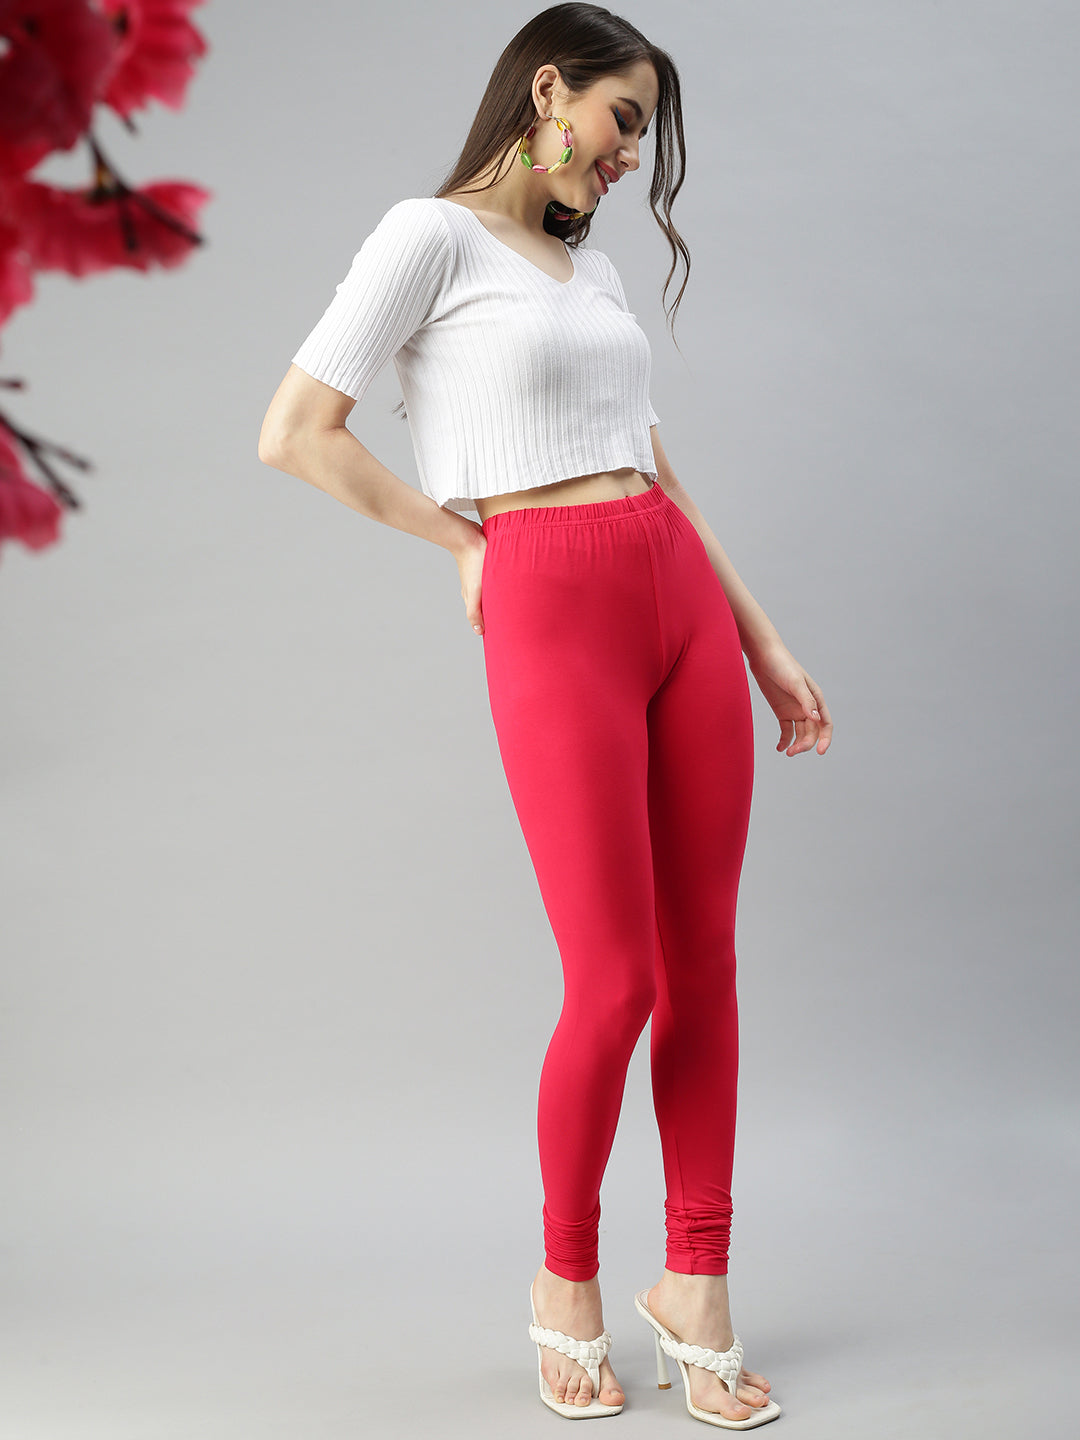 LIVA Fluid Fashion on X: Be chic yet comfortable with @brandprisma leggings.  Prisma leggings for women are made with Nature based fabrics by LIVA. Look  for the LIVA tag every time you